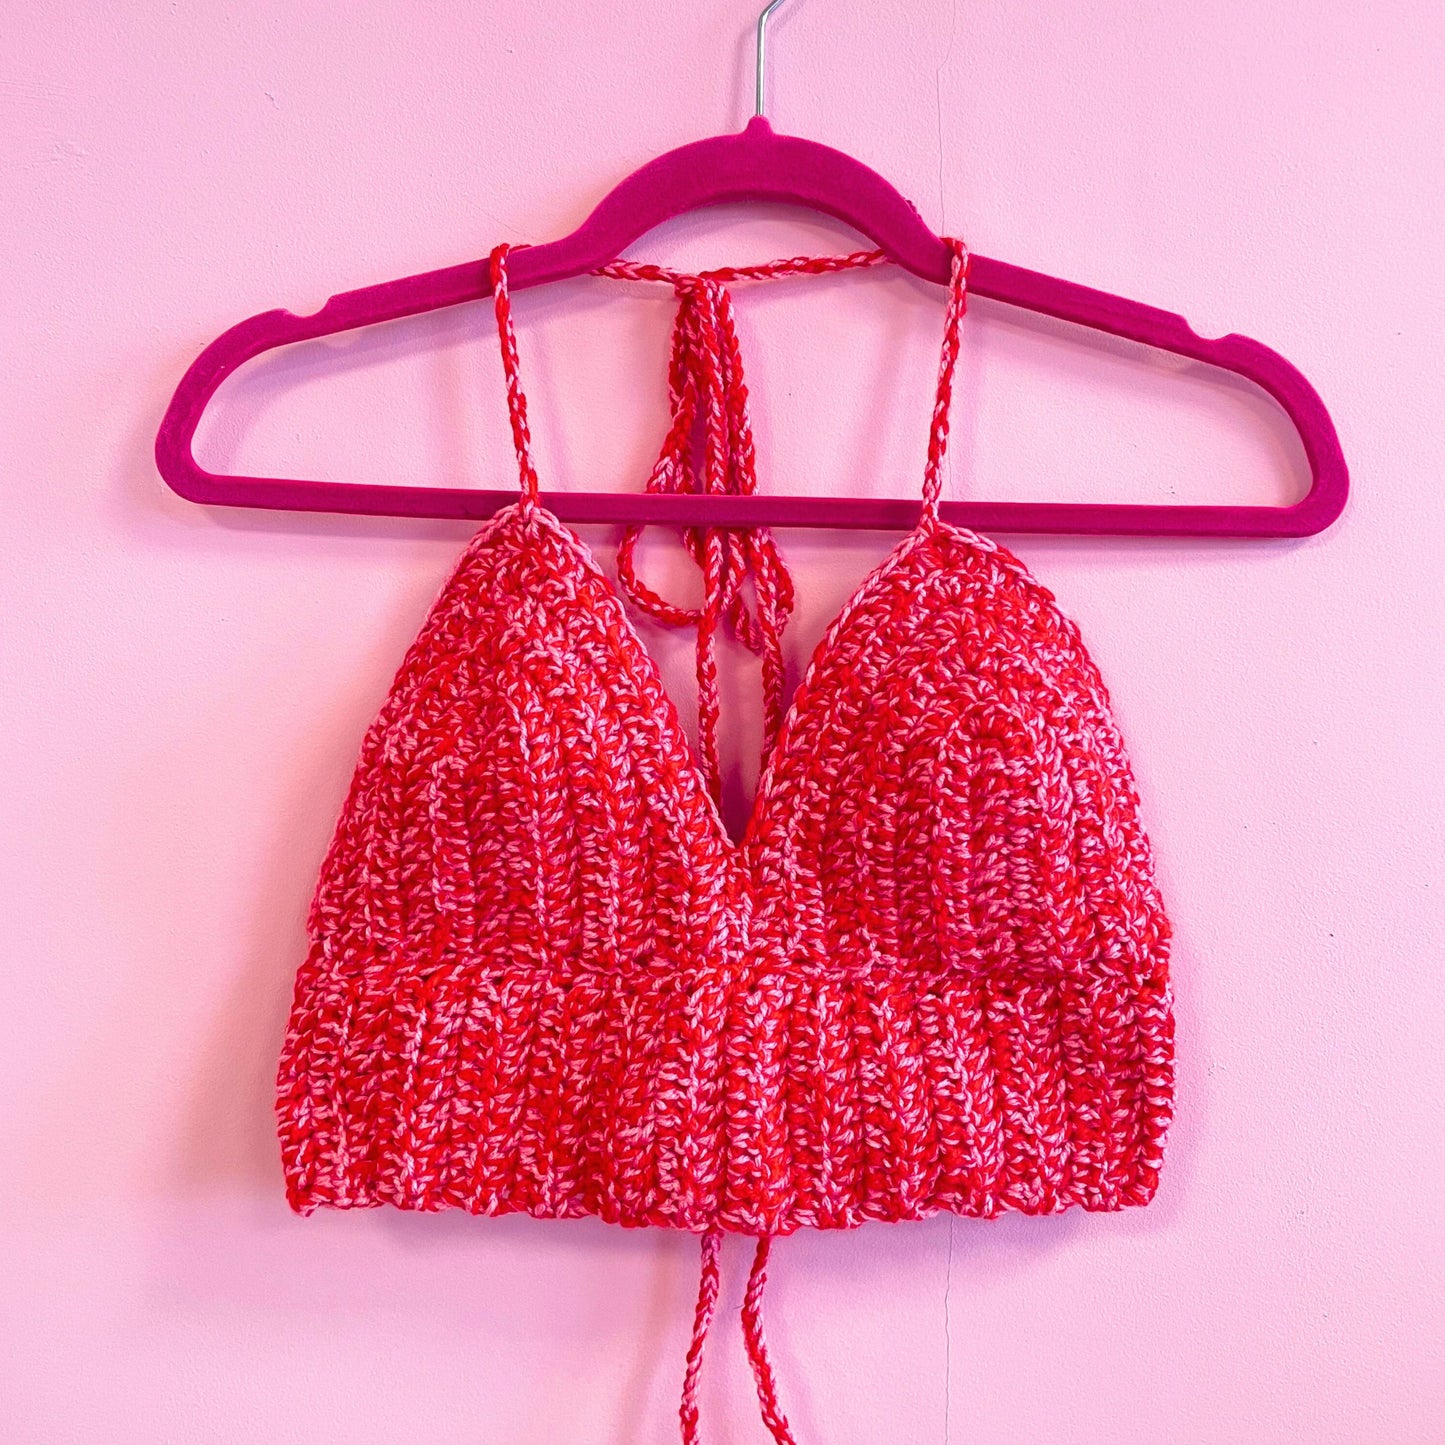 Chunky Crochet Bralette - Pink and Red